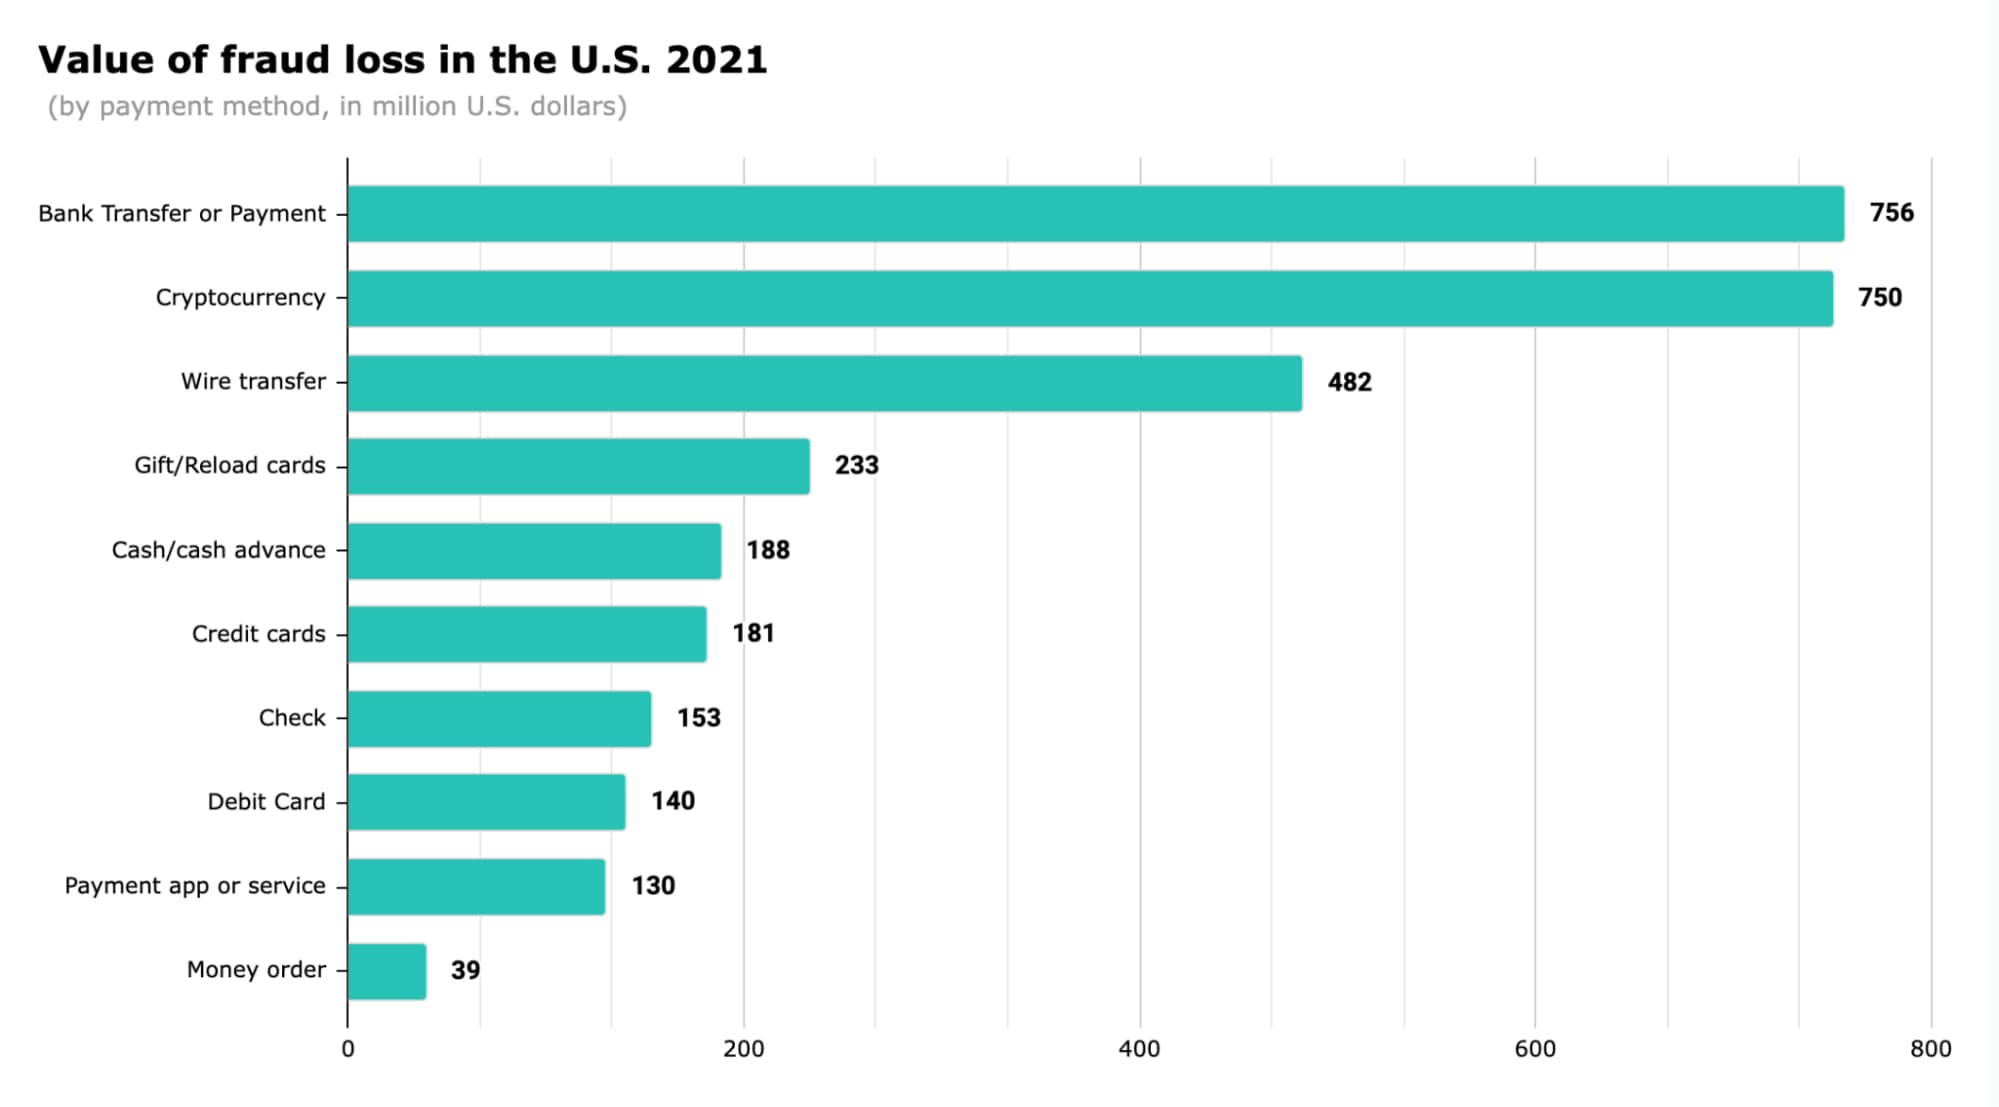 Value of fraud loss in the U.S. in 2021